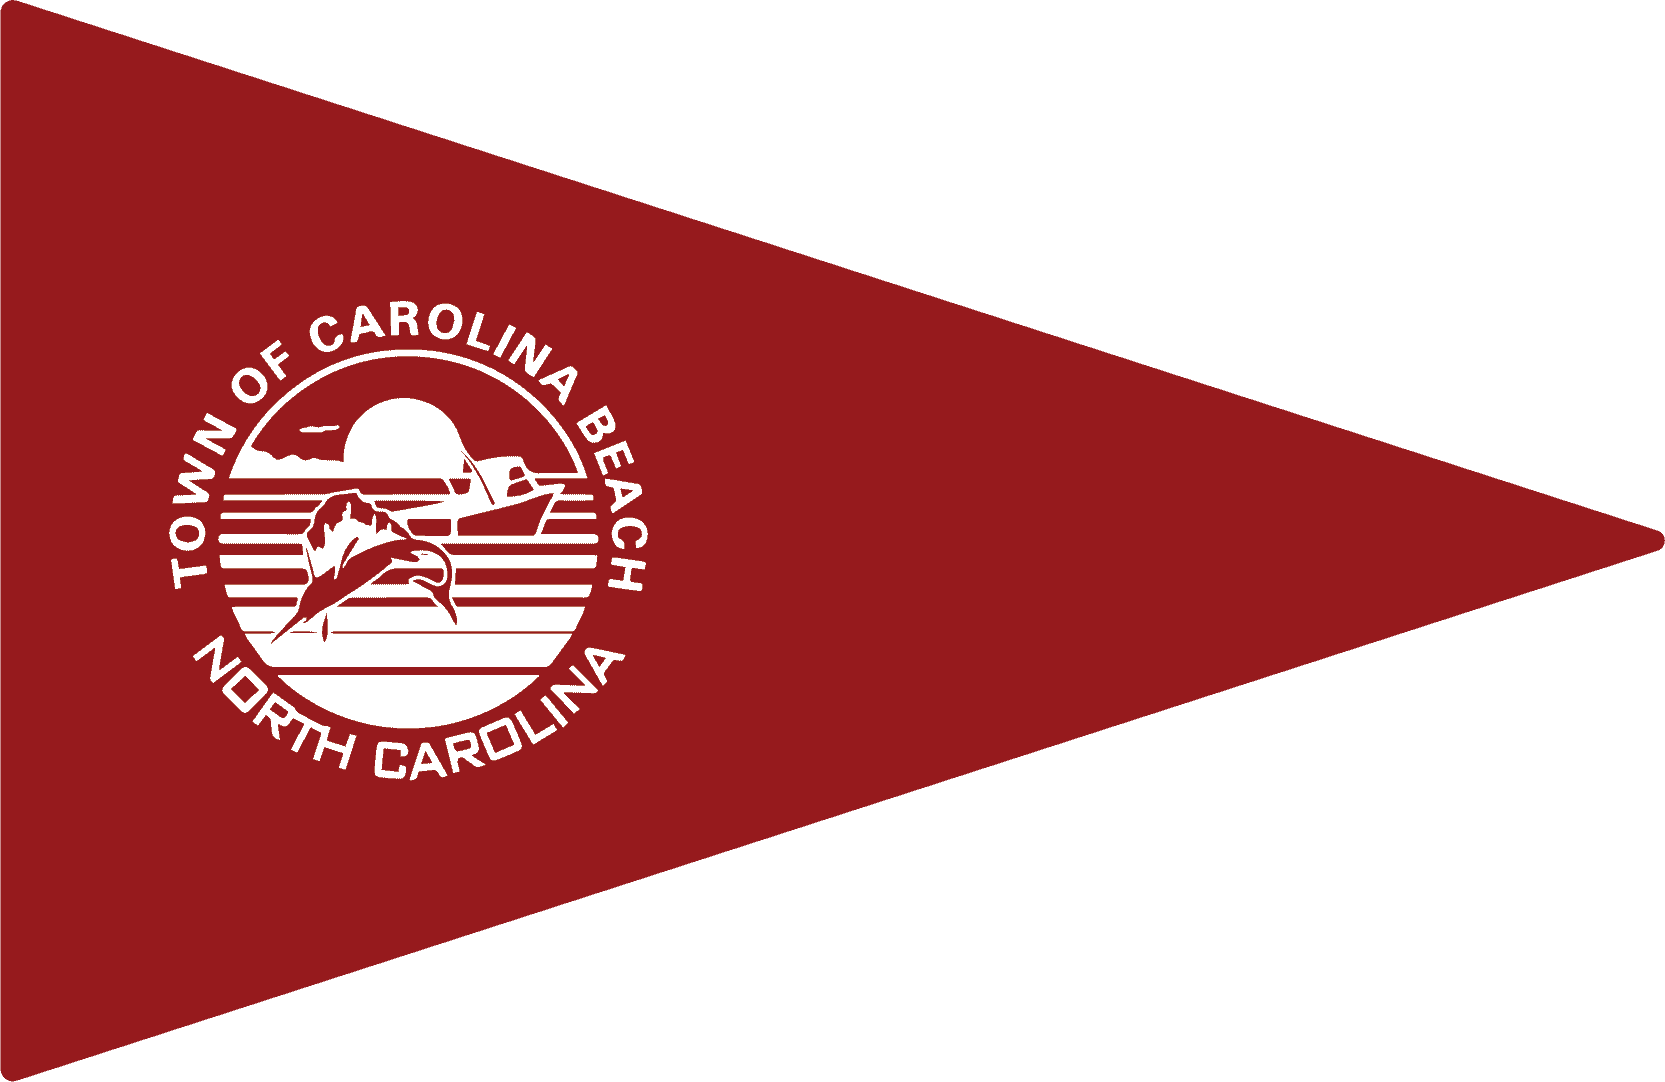 Today's Flag Color in Carolina Beach is a Red Flag